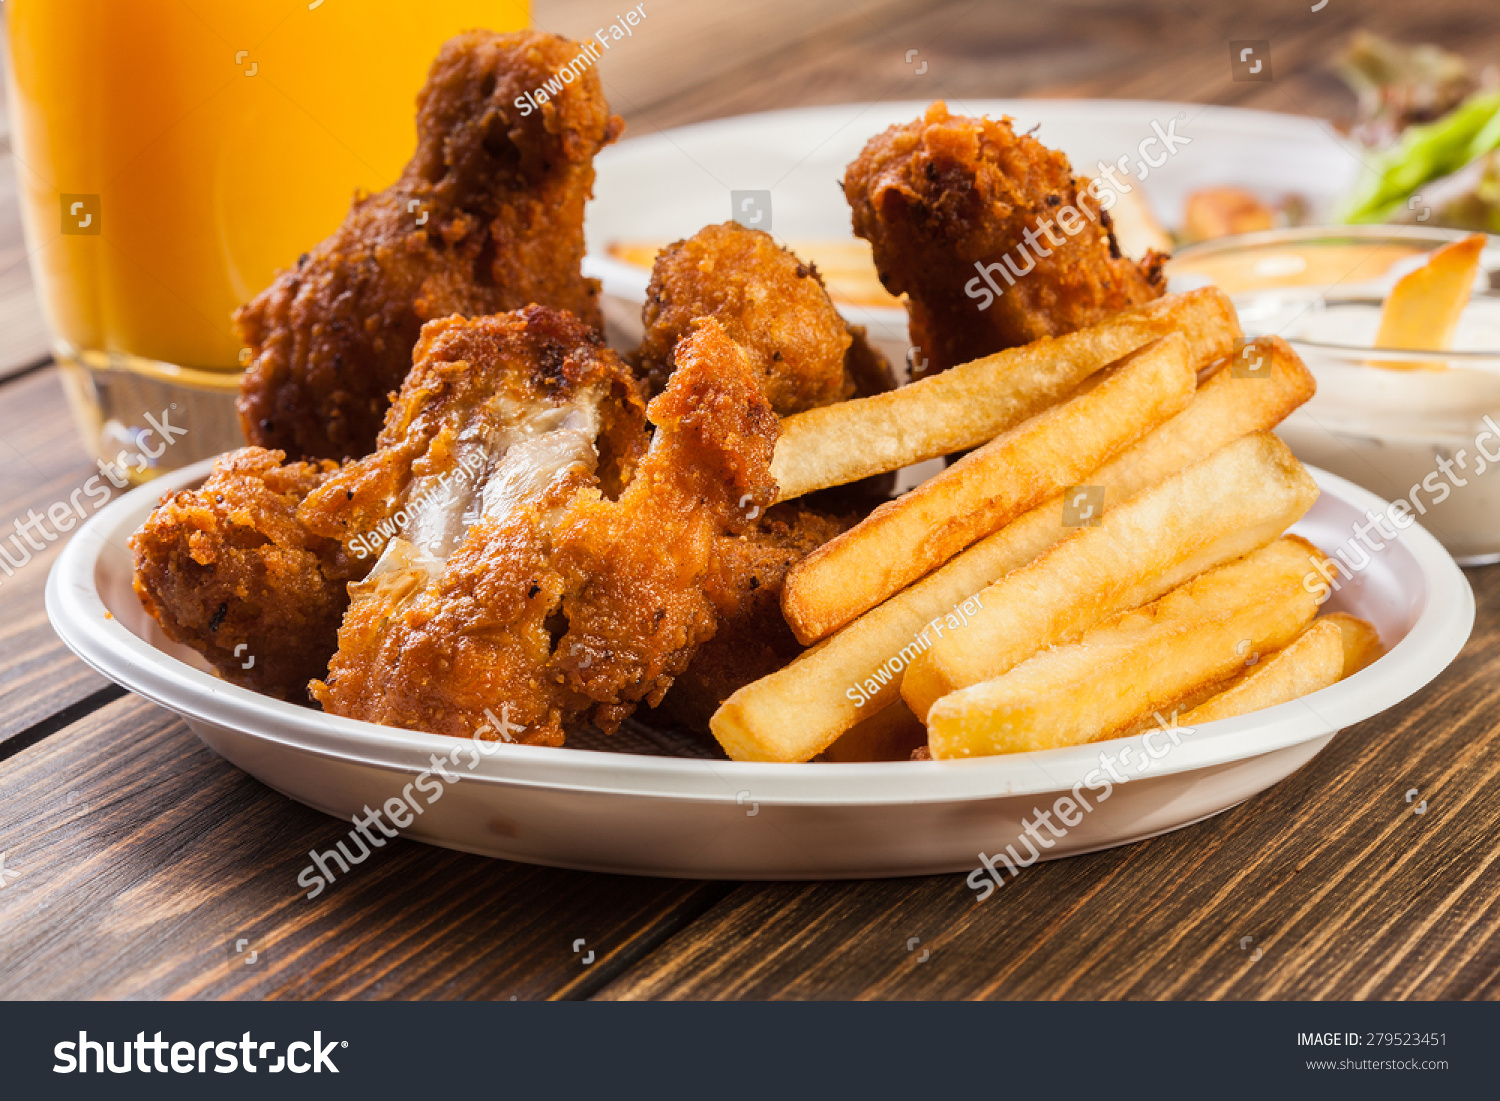 Grilled Chicken Wings, Chips and Vegetables Stock Image Image of